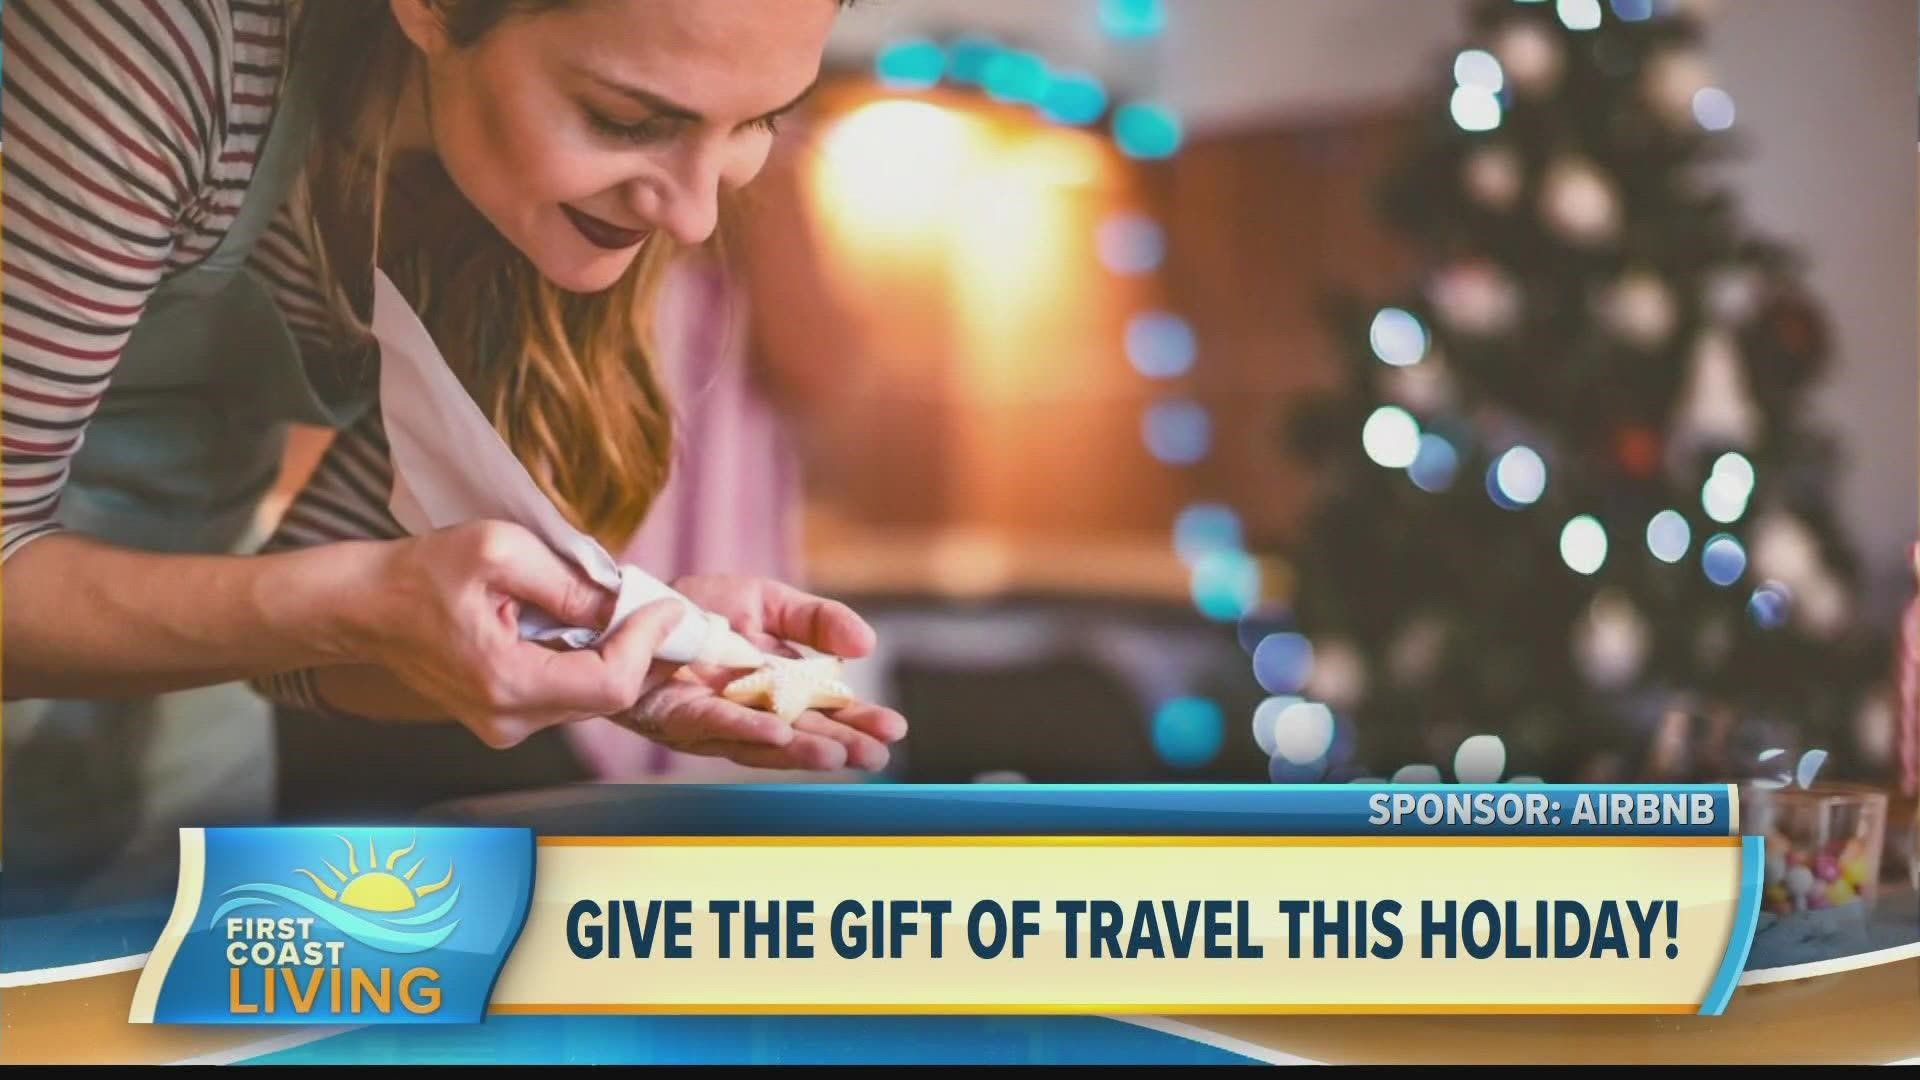 Liz DeBold Fusco, Communications Lead for North America, Airbnb helps you with a new gift idea that you will not find under your Christmas tree.